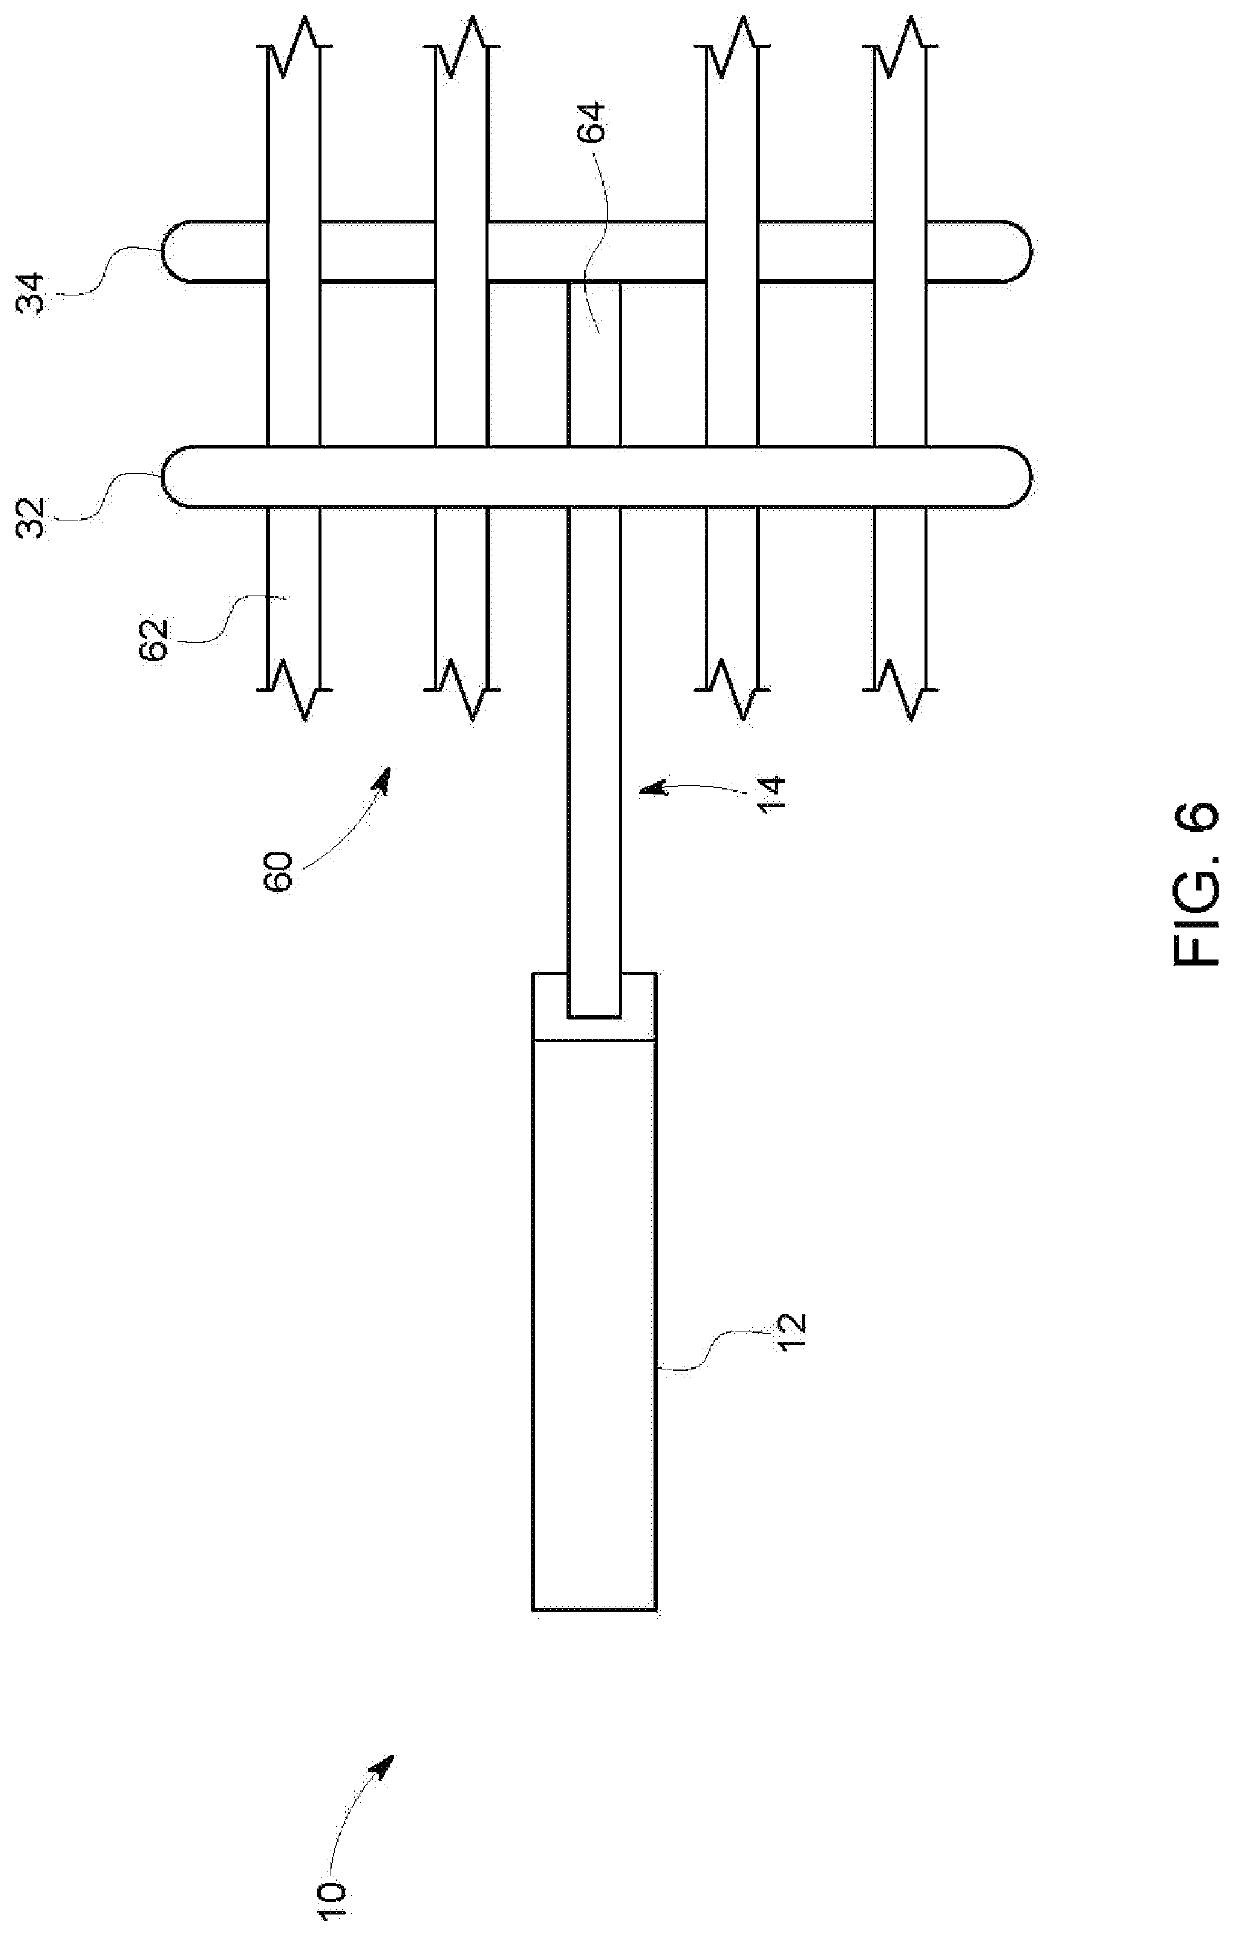 Method and apparatus for cleaning/scraping metal grates on a grill